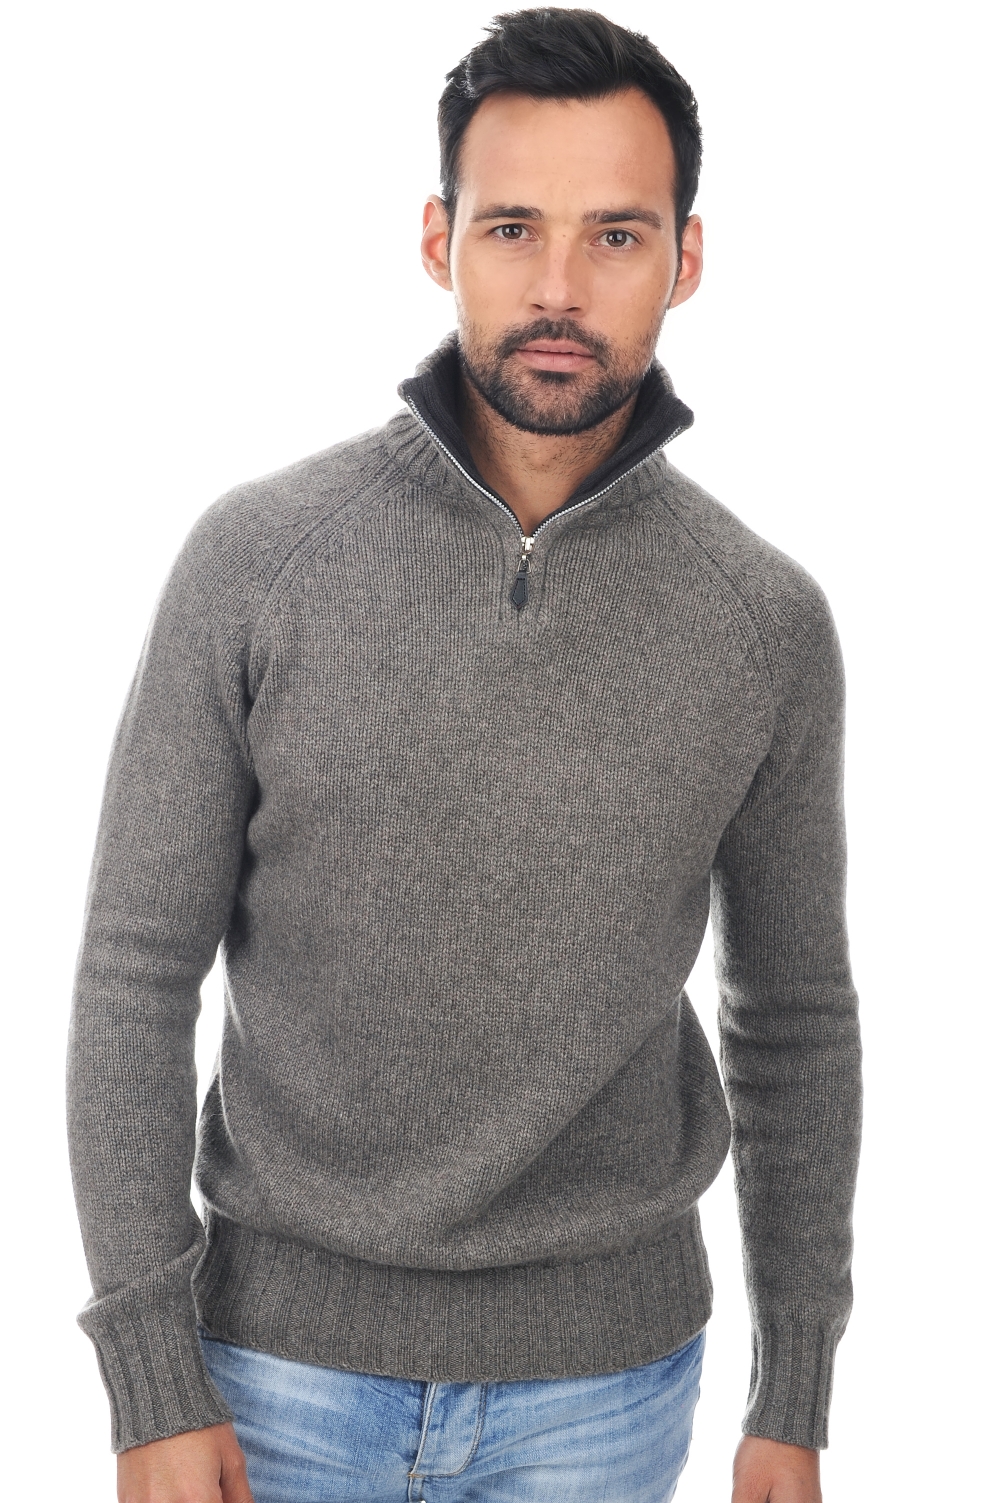 Cachemire pull homme epais olivier marmotte anthracite m